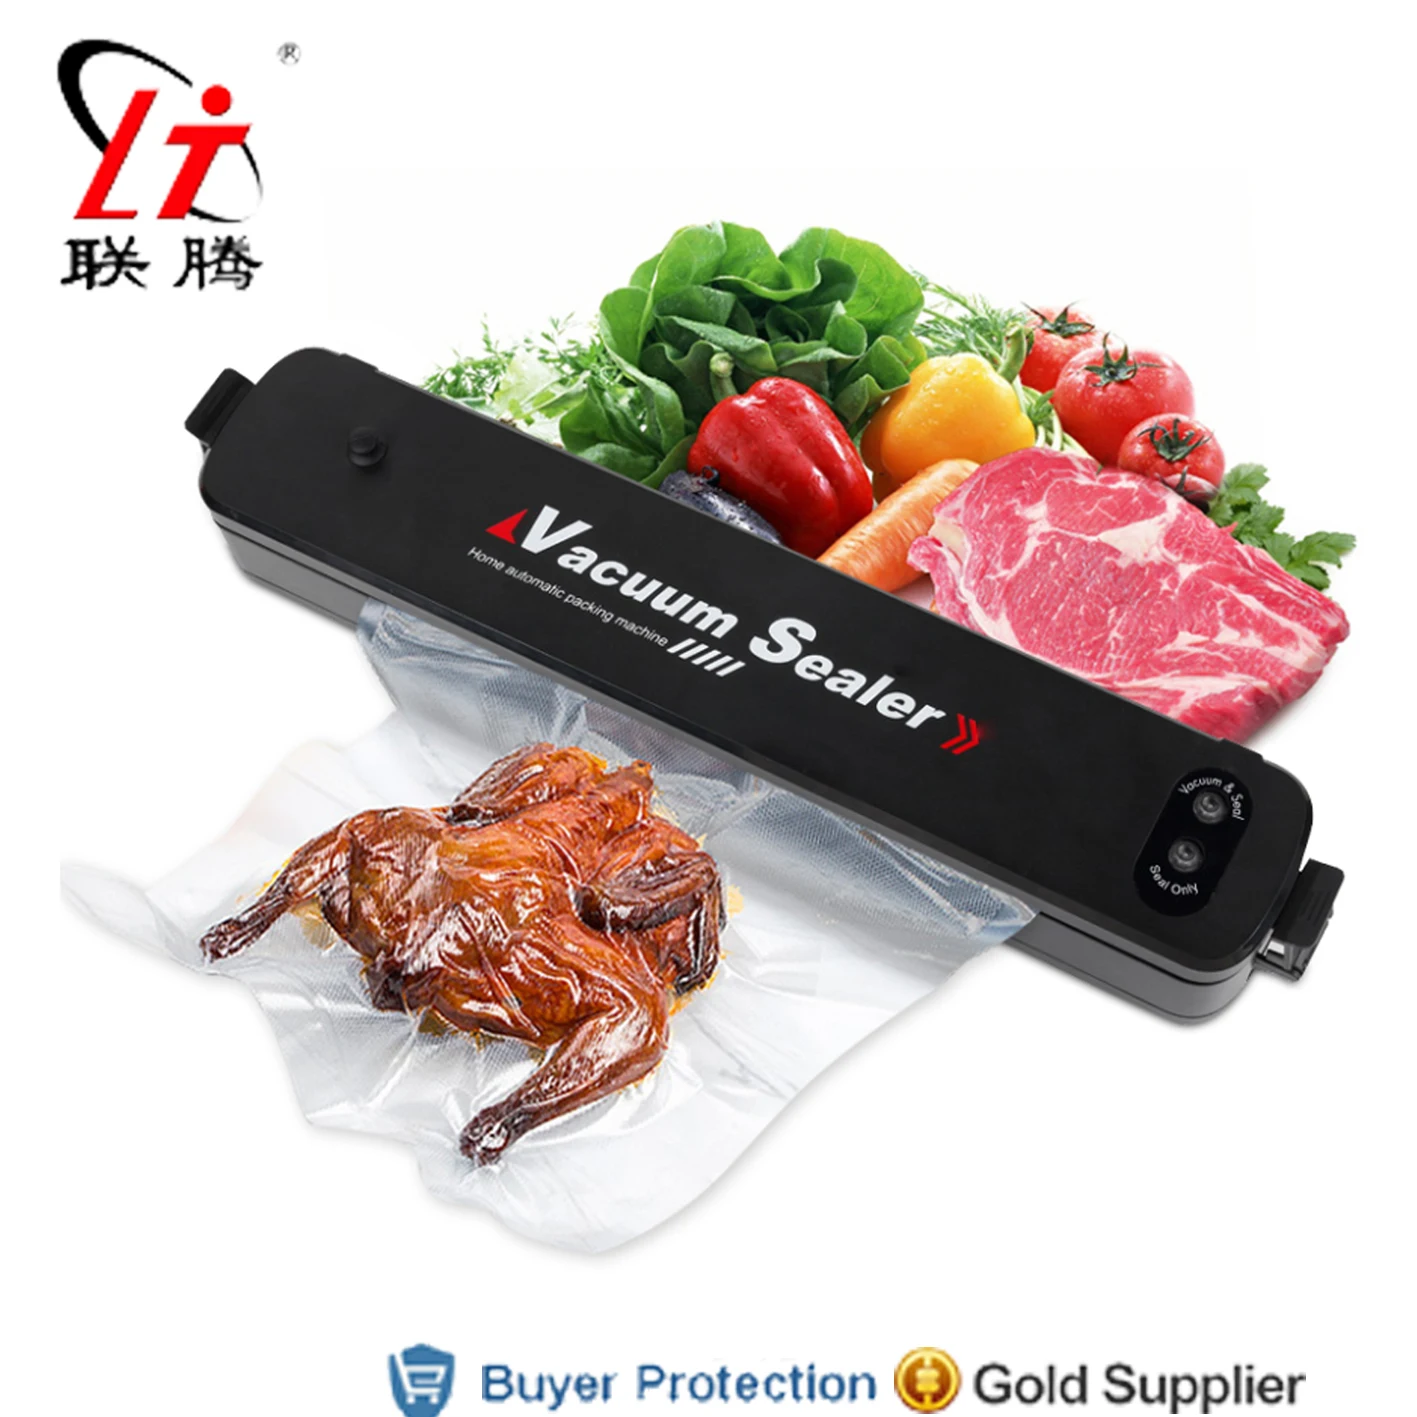 

Home Vacuum Sealer Professional Vaccum Sealing Machine Pump Usb Kitchen Food Fish Fruit Saver Preservation System With 15 Bags